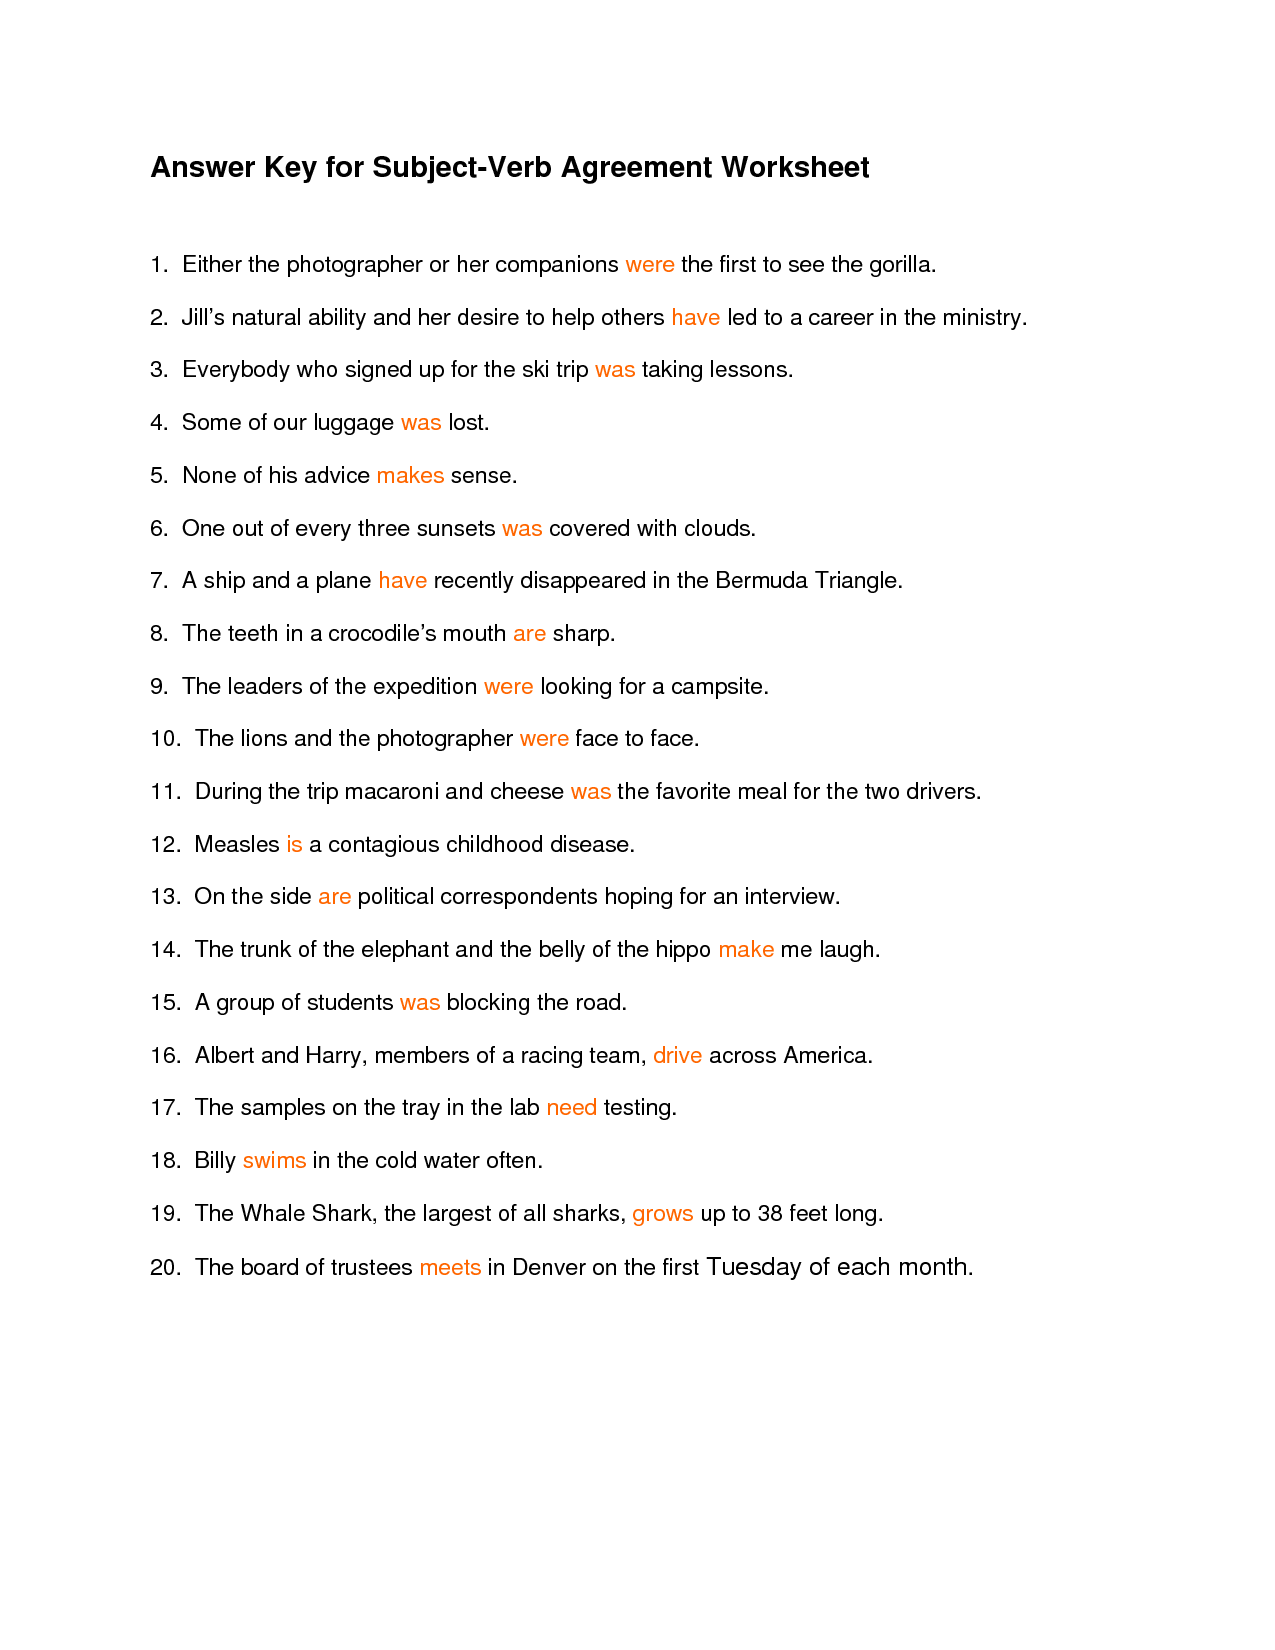 13-best-images-of-fallacy-worksheets-and-answer-keys-gas-laws-worksheet-answer-key-logical